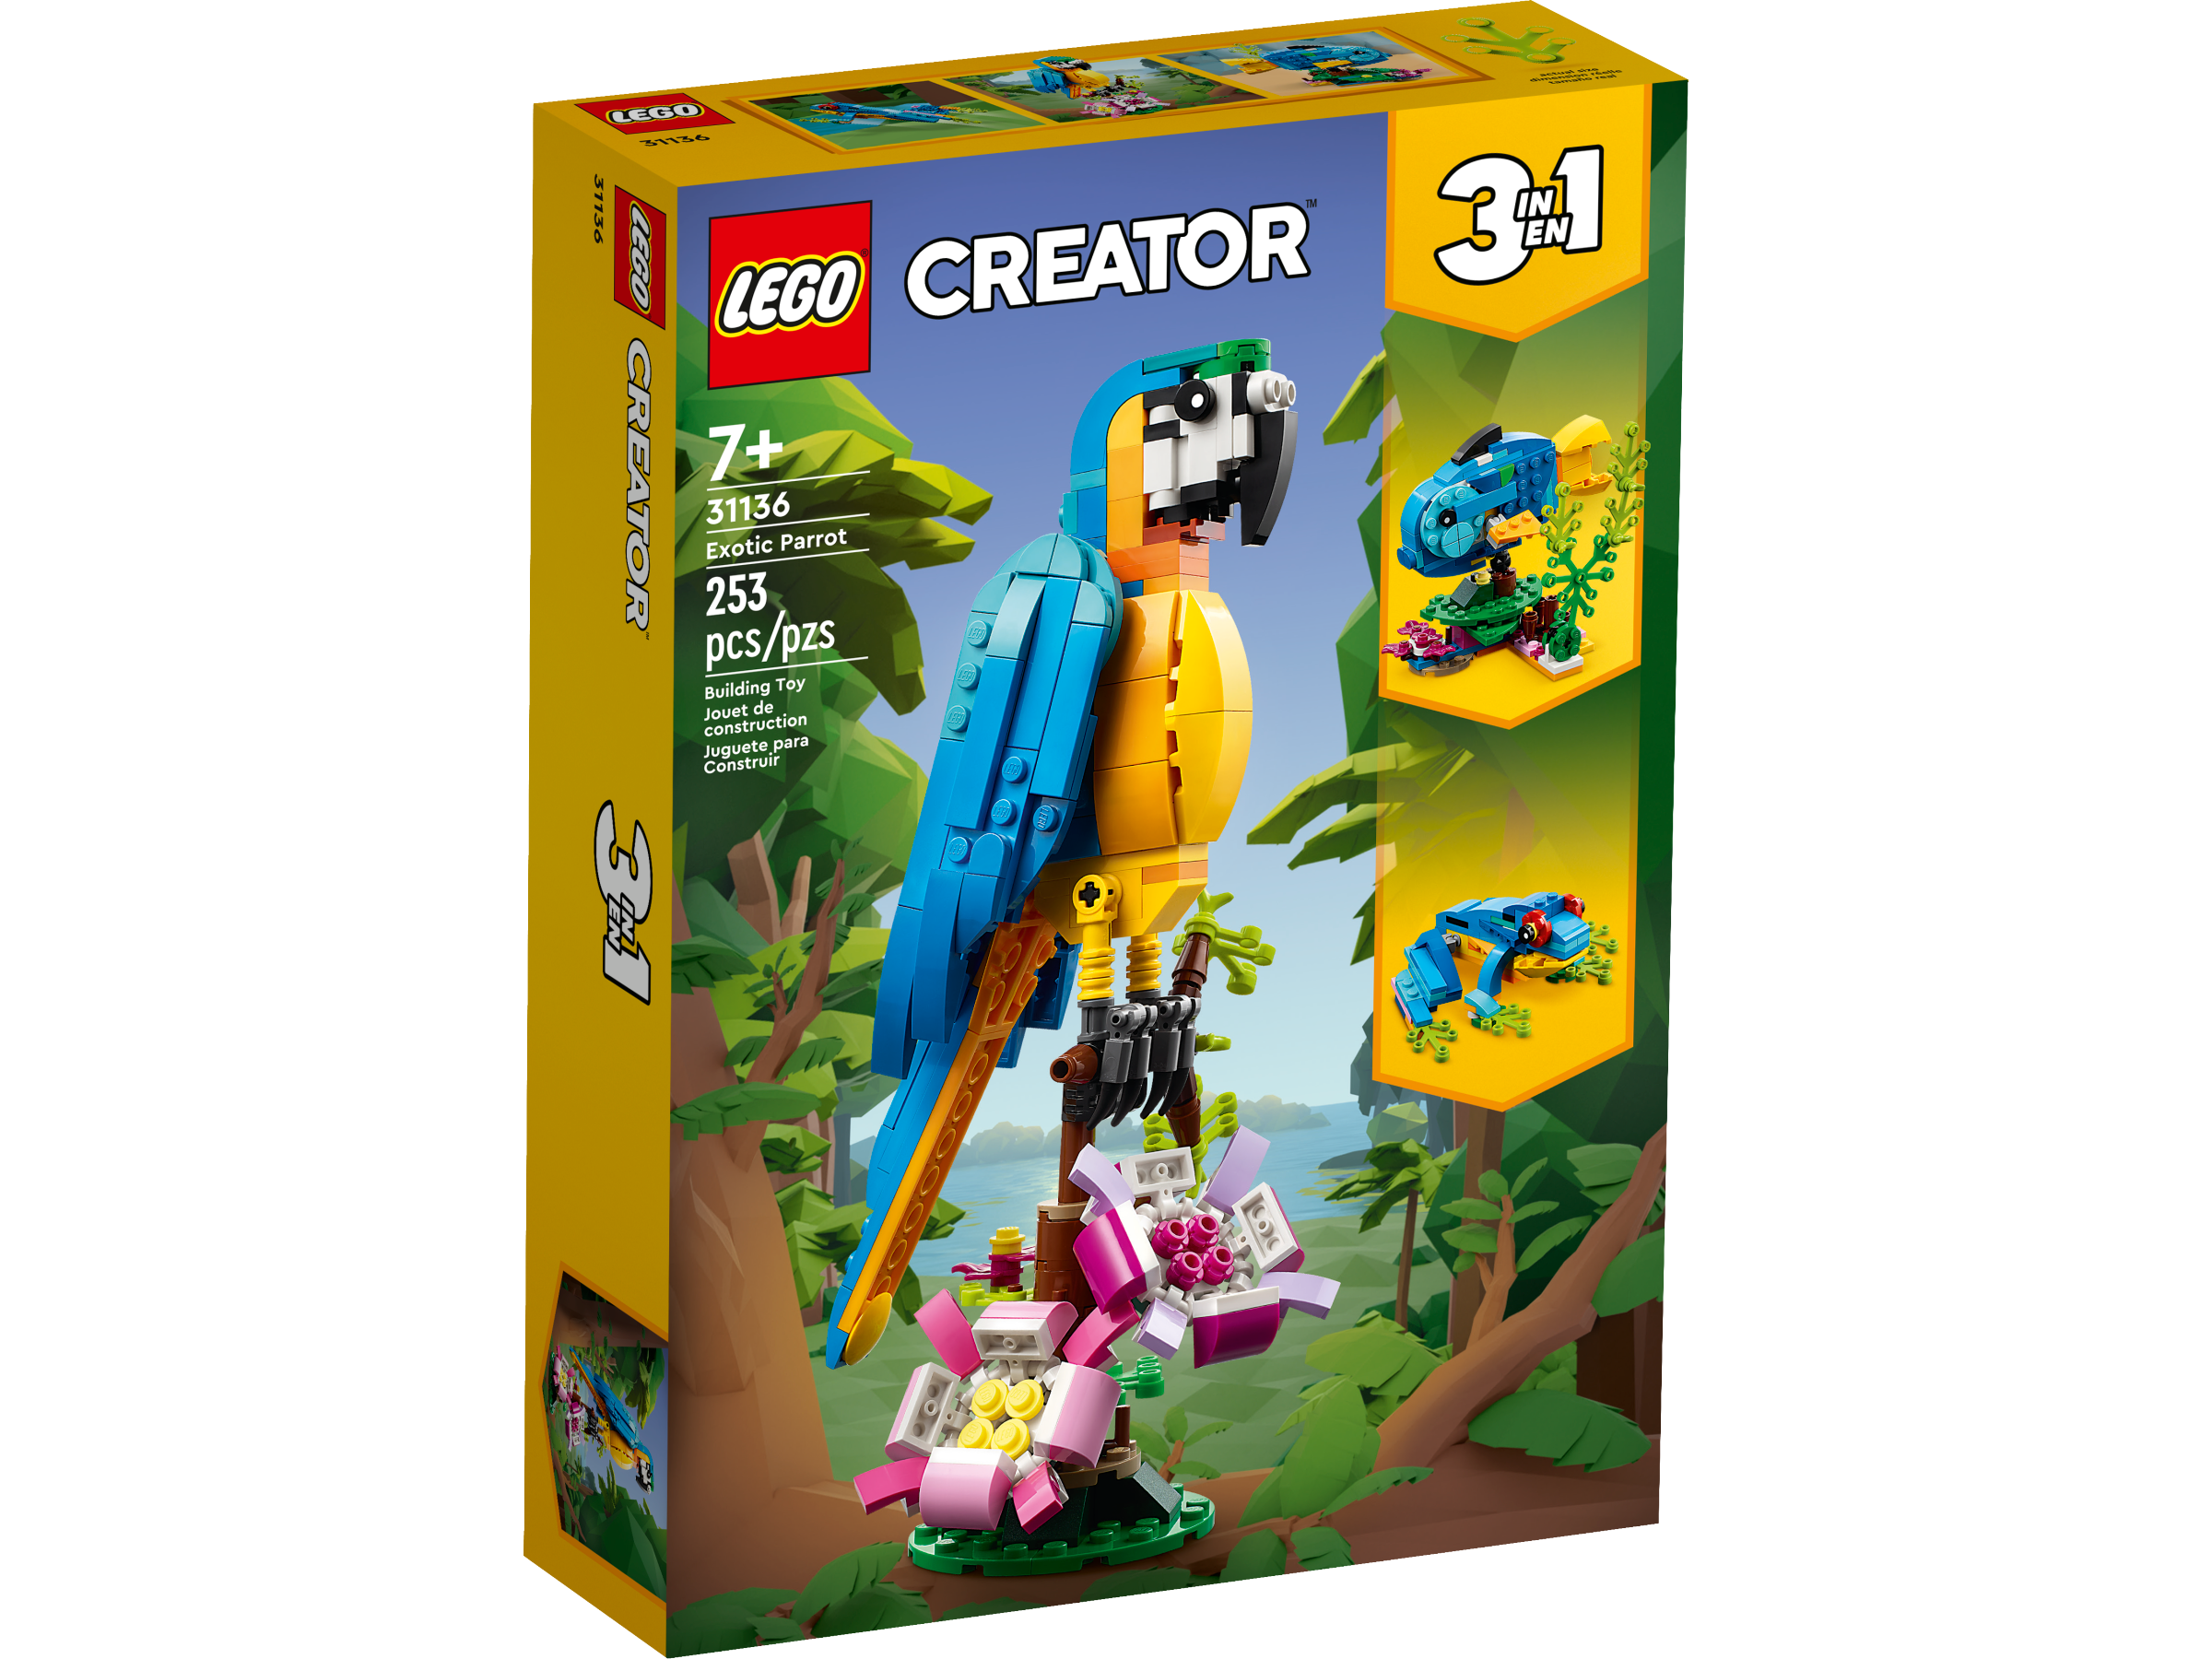 Exotic Parrot 31136 | Creator 3-in-1 | Buy online at the Official